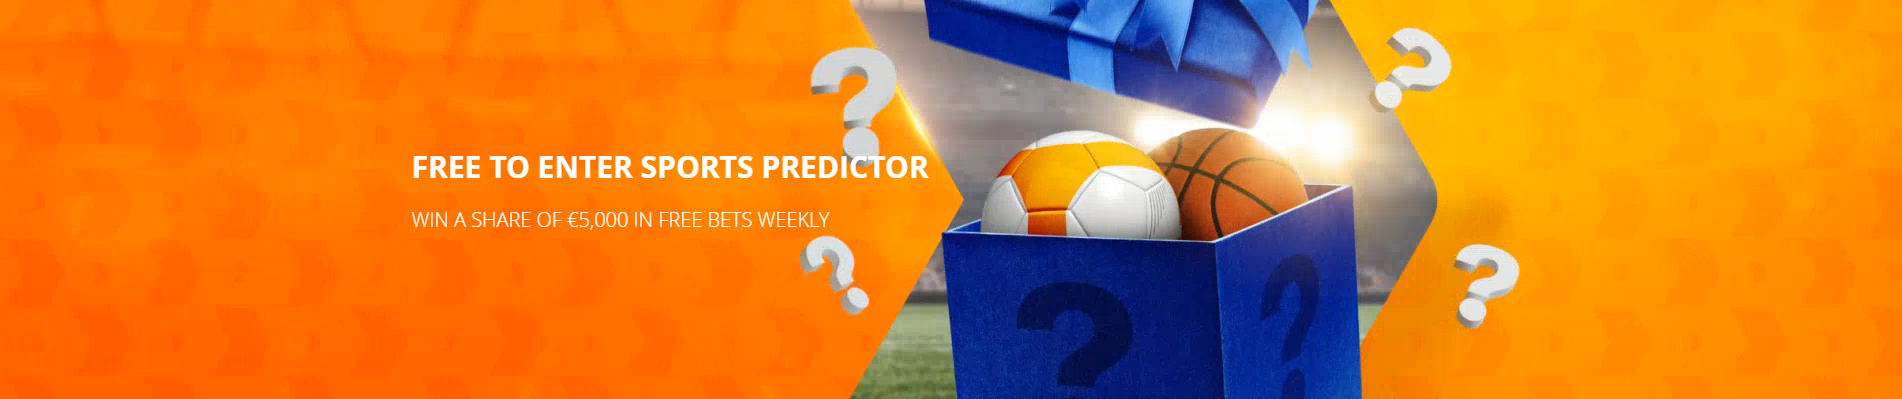 bookmaker betsson sports predictor offer